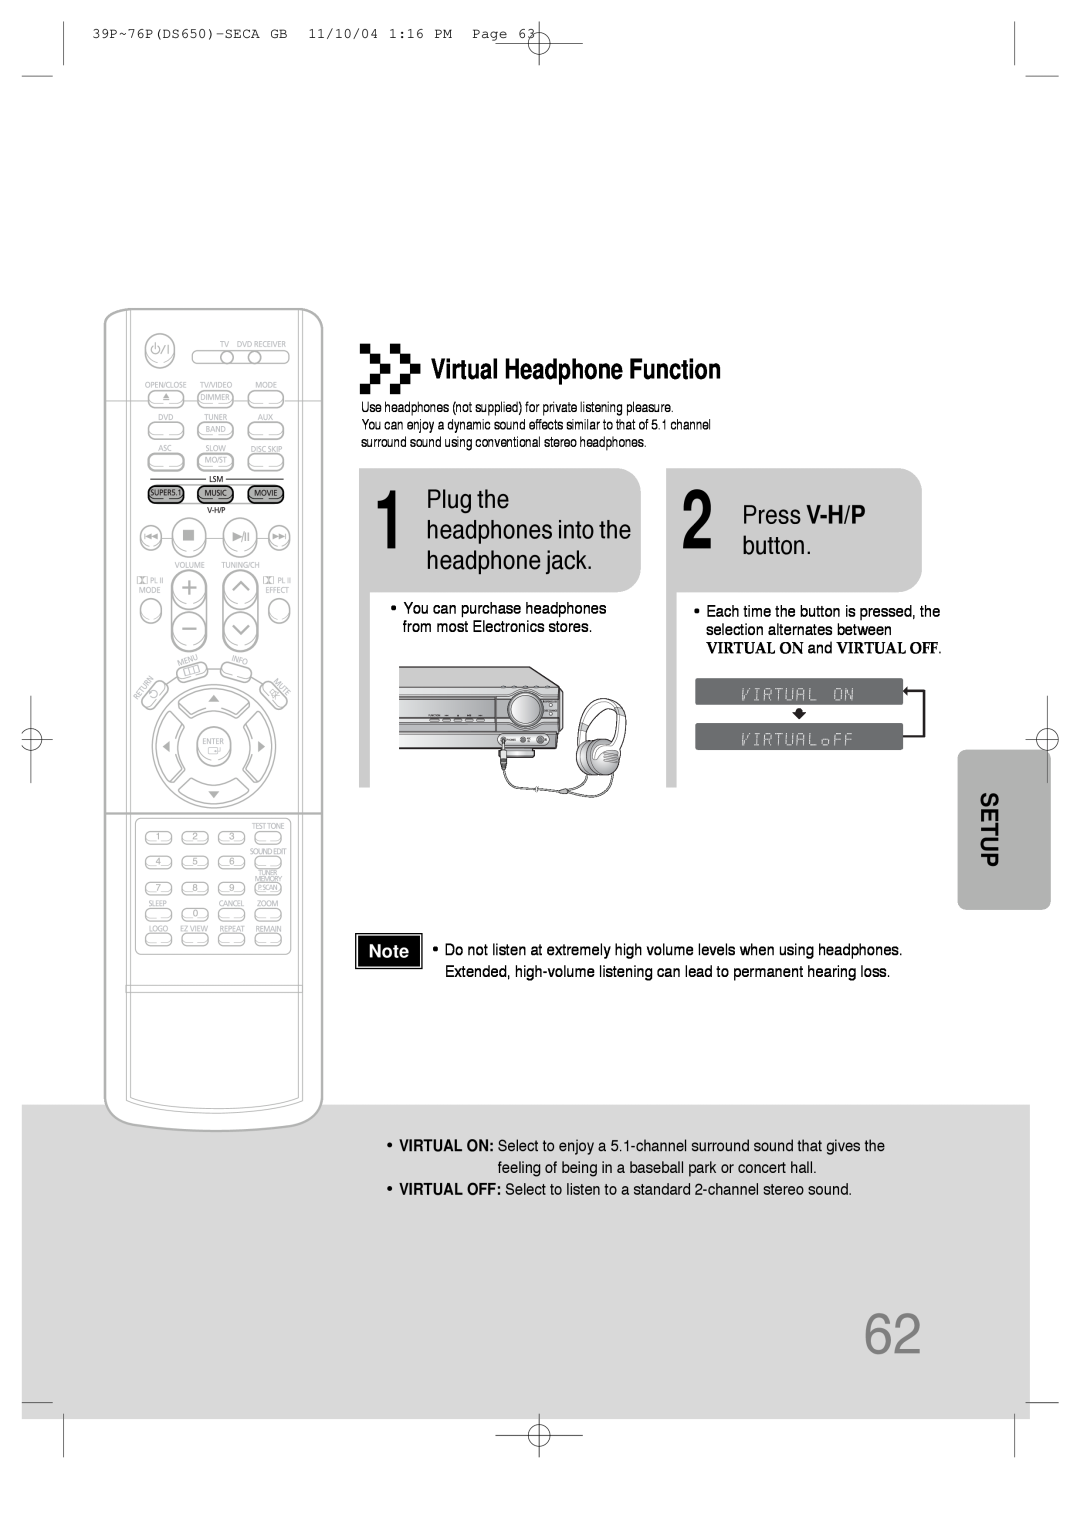 Samsung HT-DS650 instruction manual Virtual Headphone Function, button, Press V-H/P, Setup, VIRTUAL ON and VIRTUAL OFF 